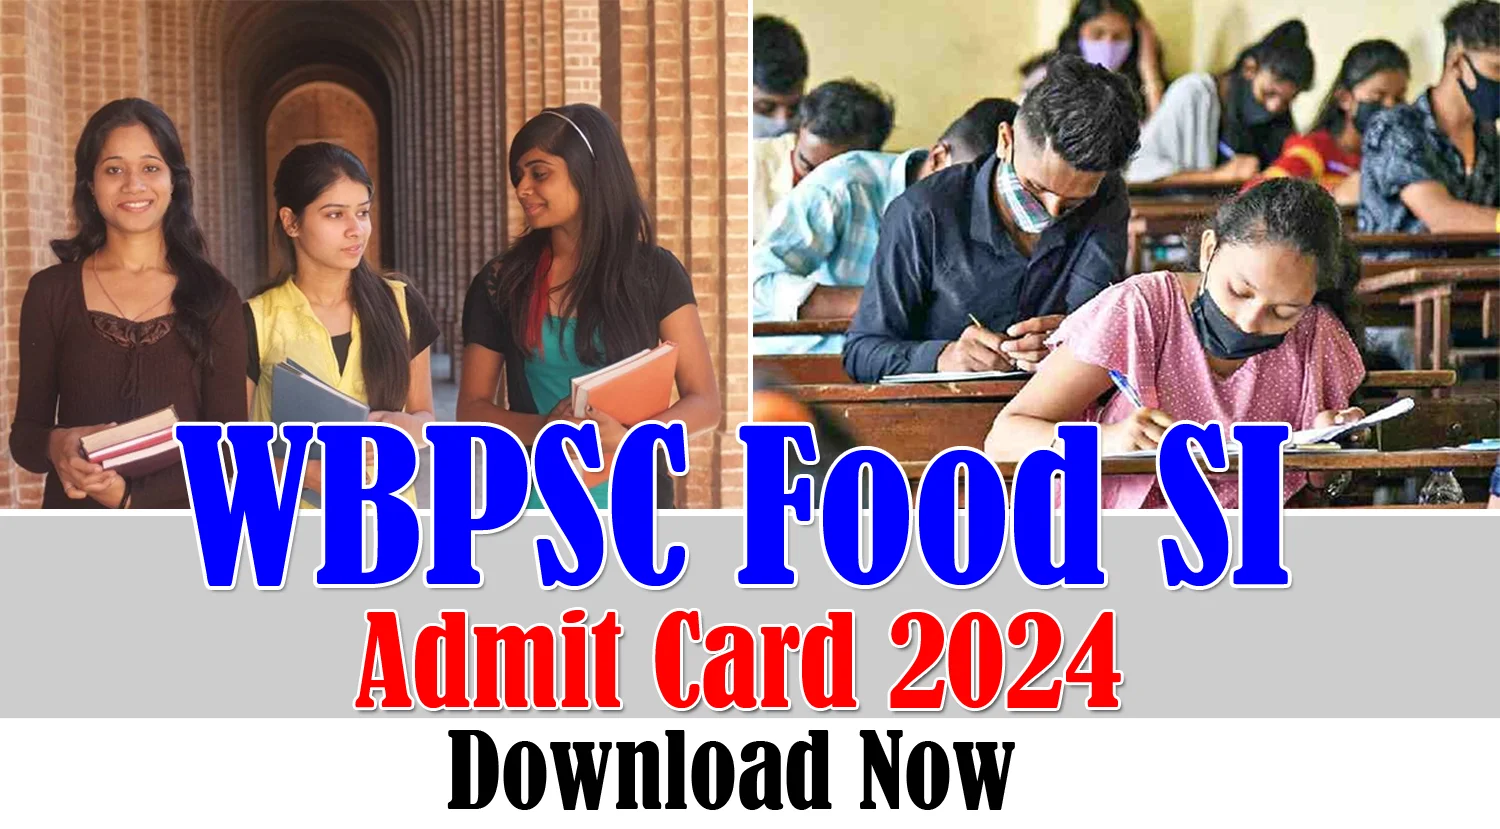 WBPSC Food SI Admit Card 2024 Download Now